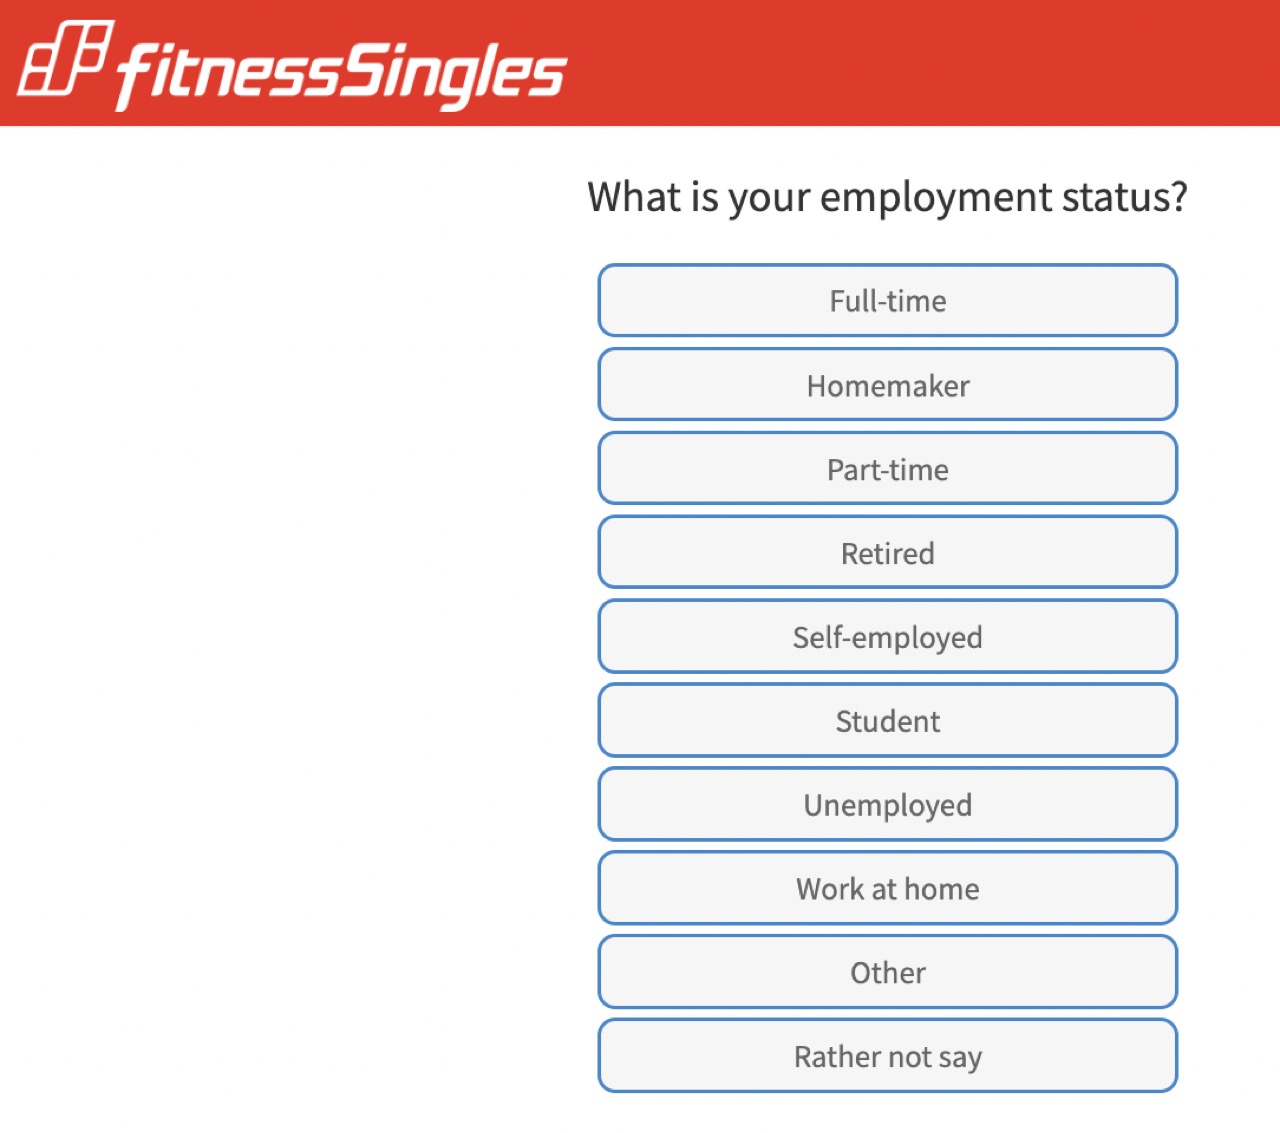 fitnesssingles-review-signup-23